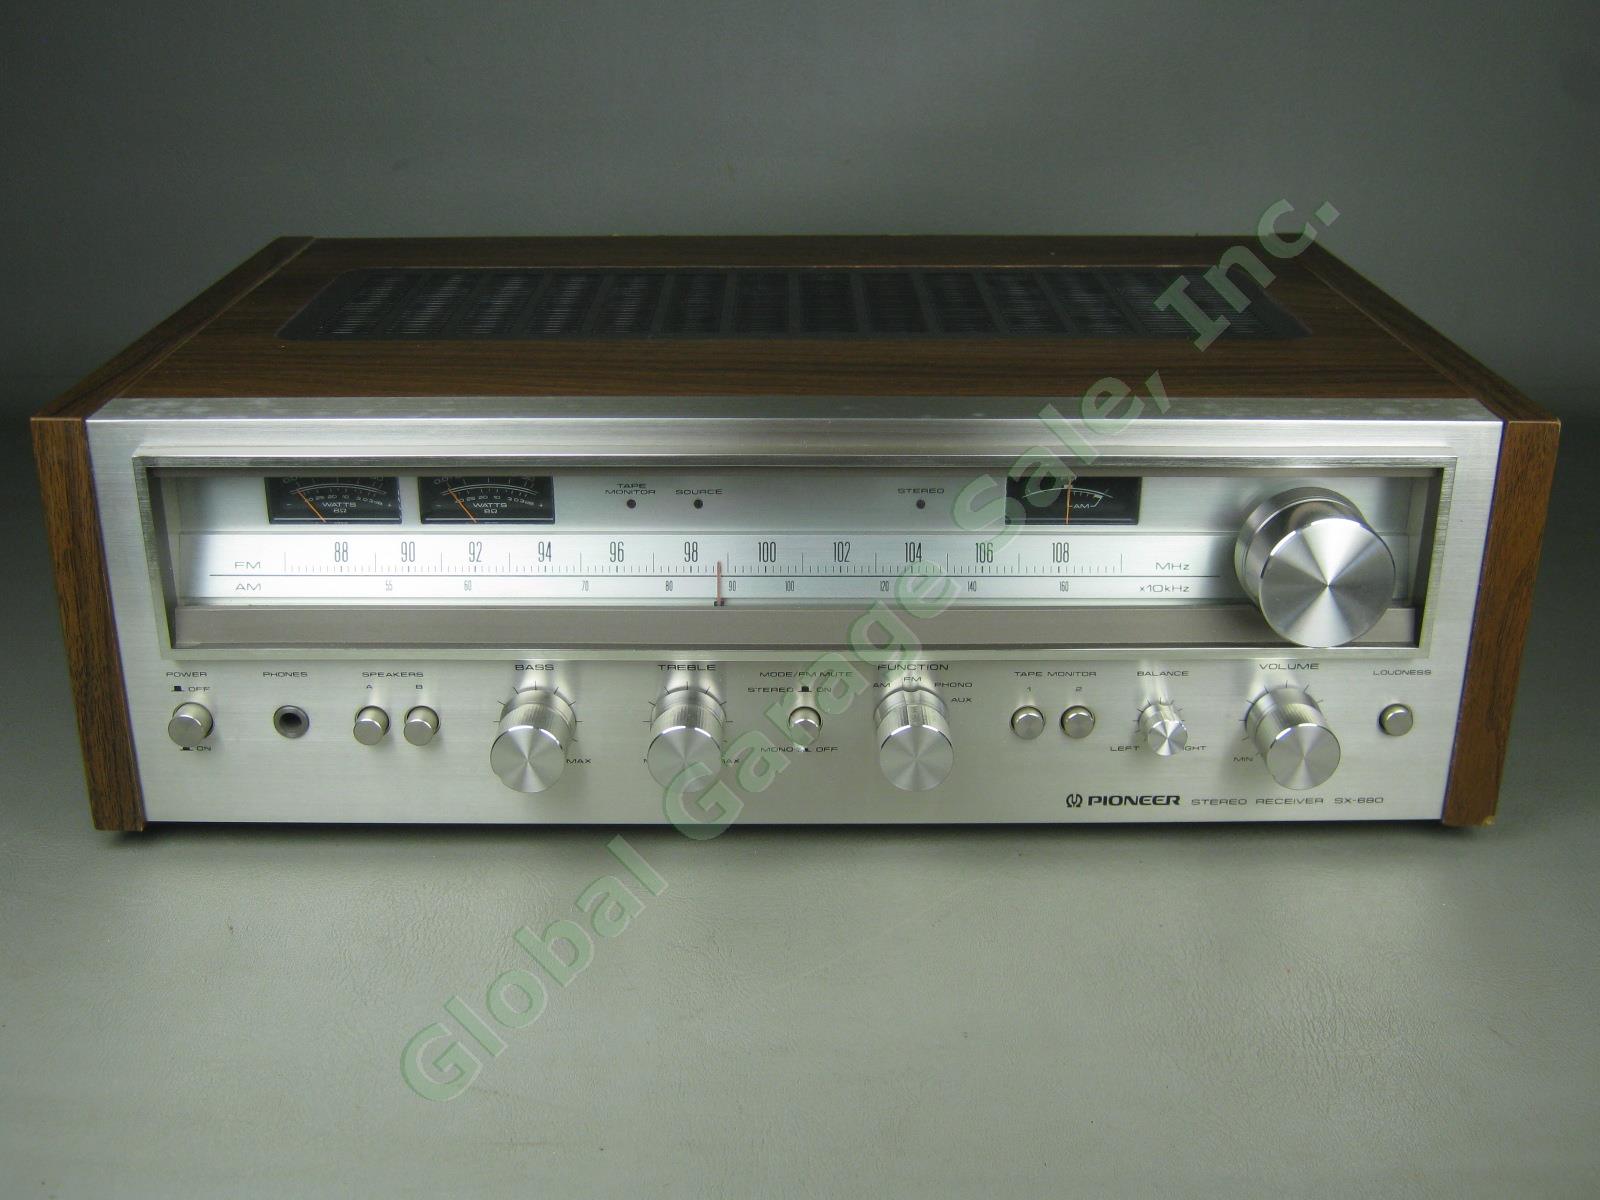 Vtg Pioneer SX-680 Solid State AM/FM Stereo Receiver + Wood Cabinet Clean Tested